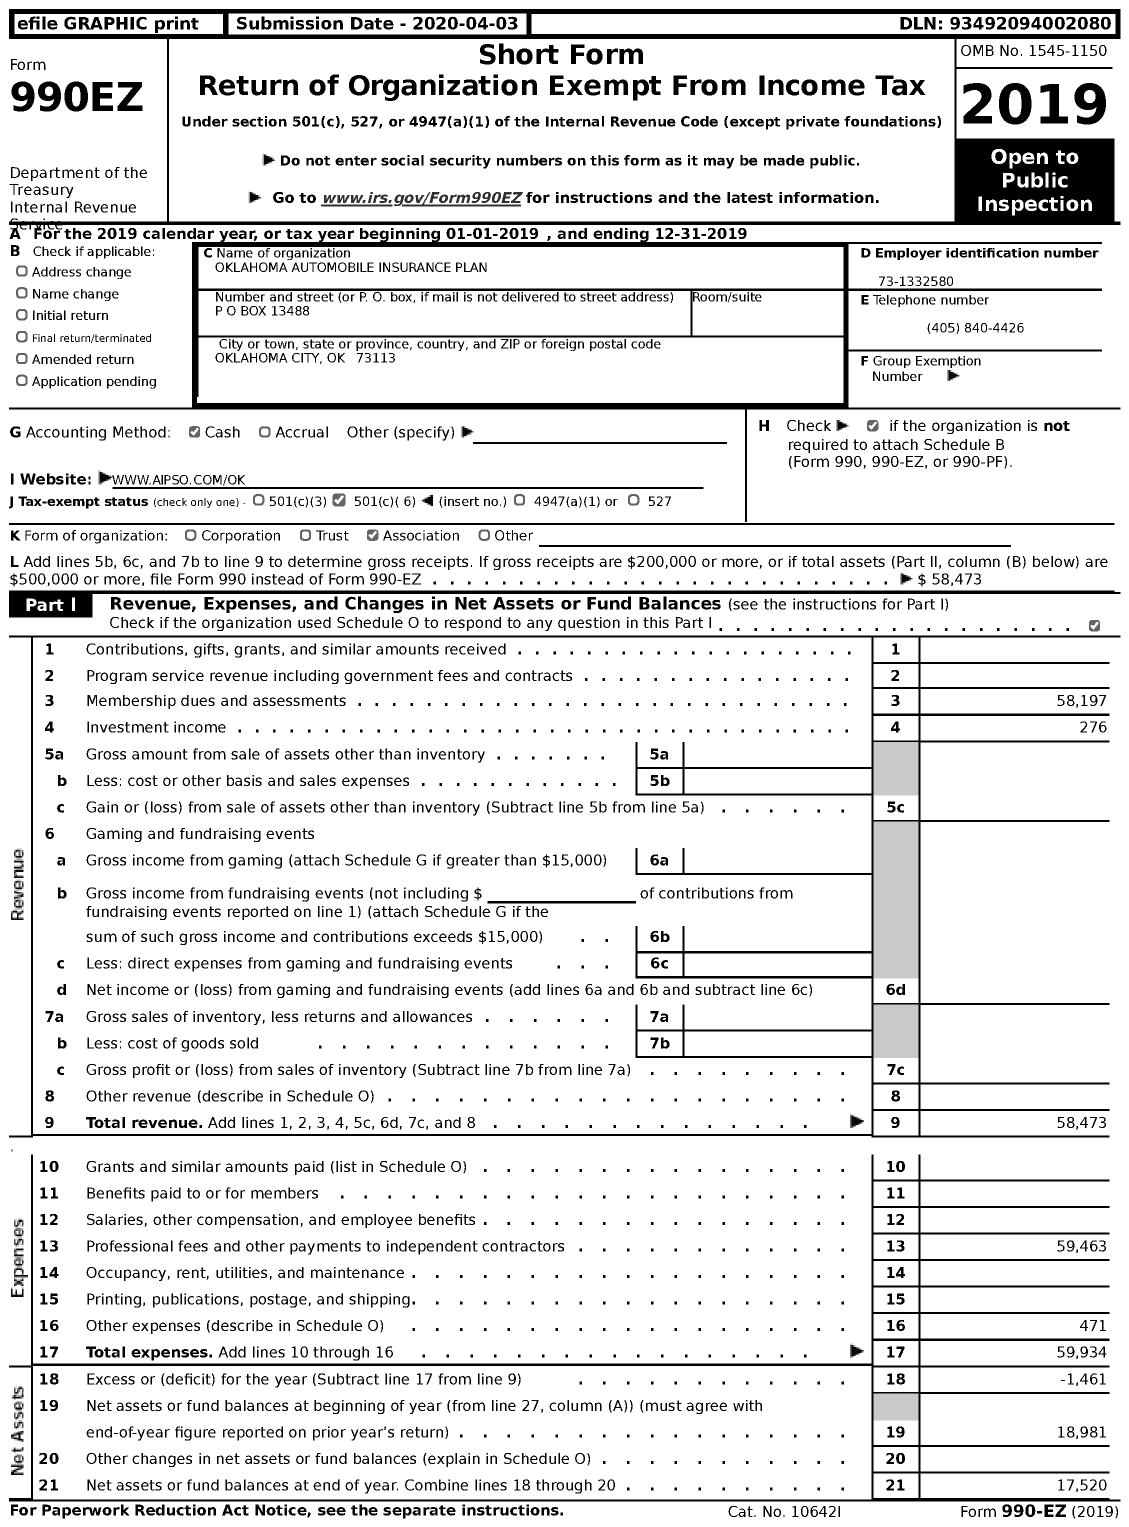 Image of first page of 2019 Form 990EZ for Oklahoma Automobile Insurance Plan